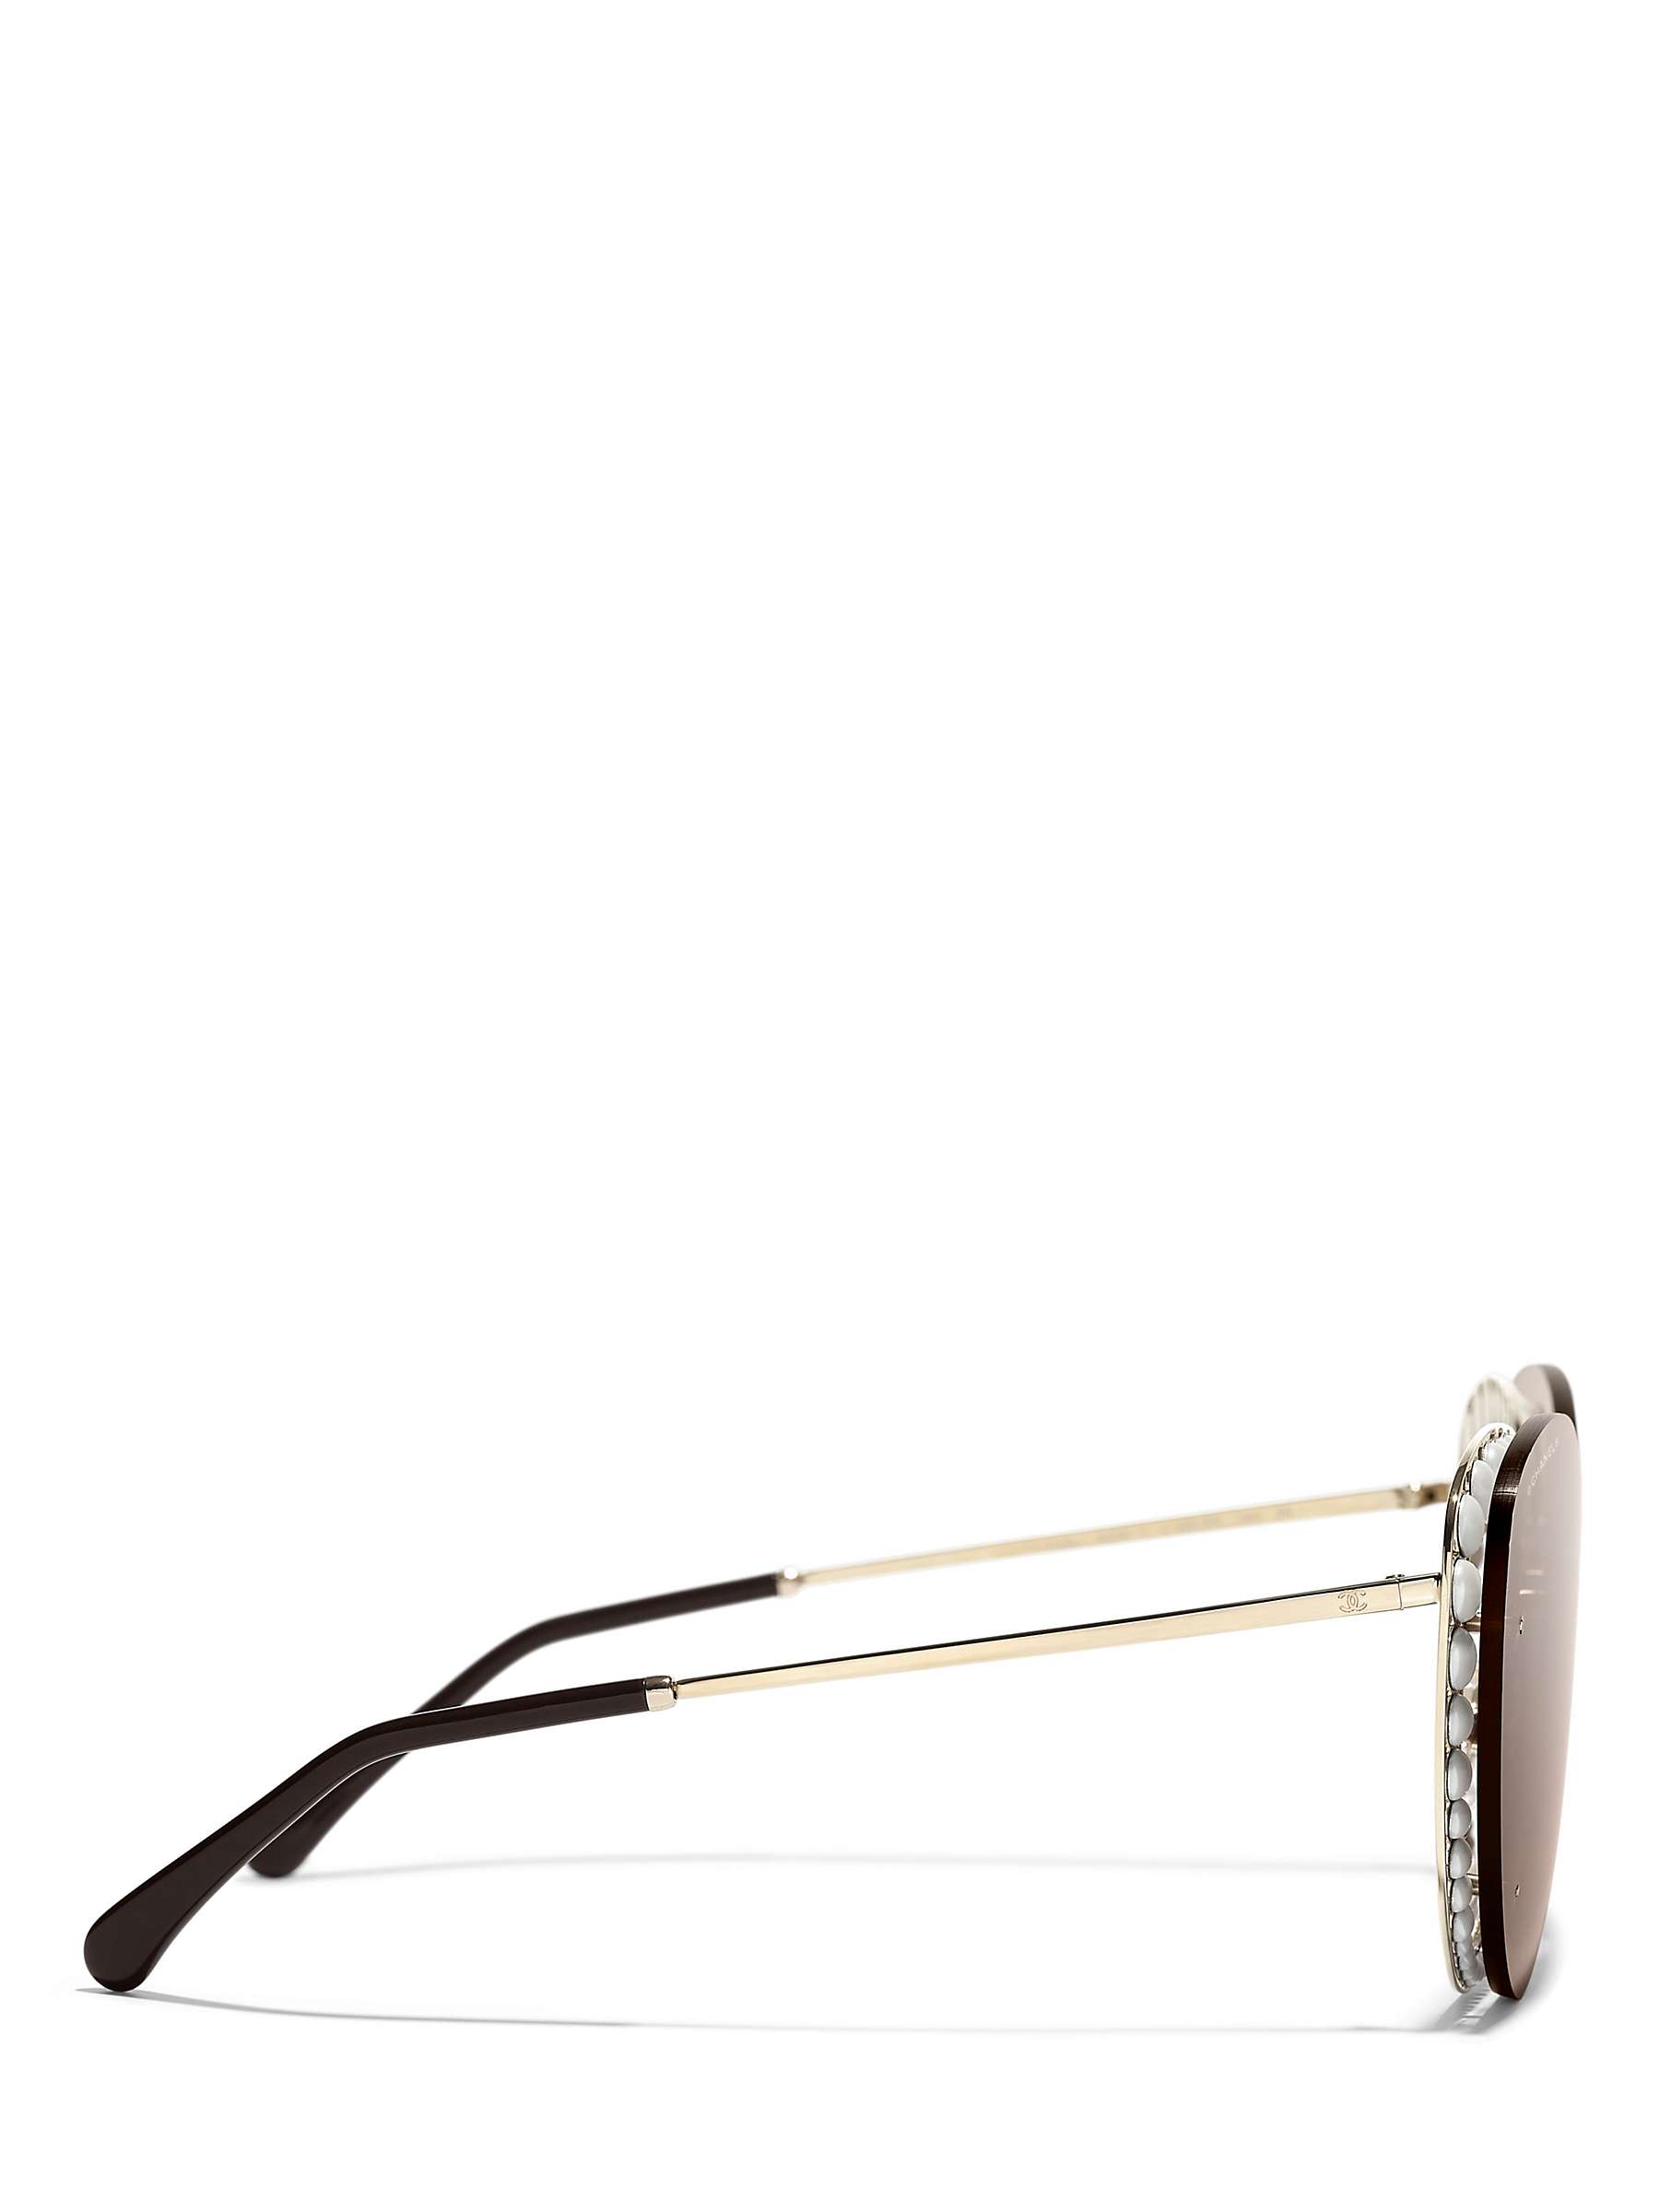 Buy CHANEL Butterfly Sunglasses CH4236 Gold/Brown Gradient Online at johnlewis.com